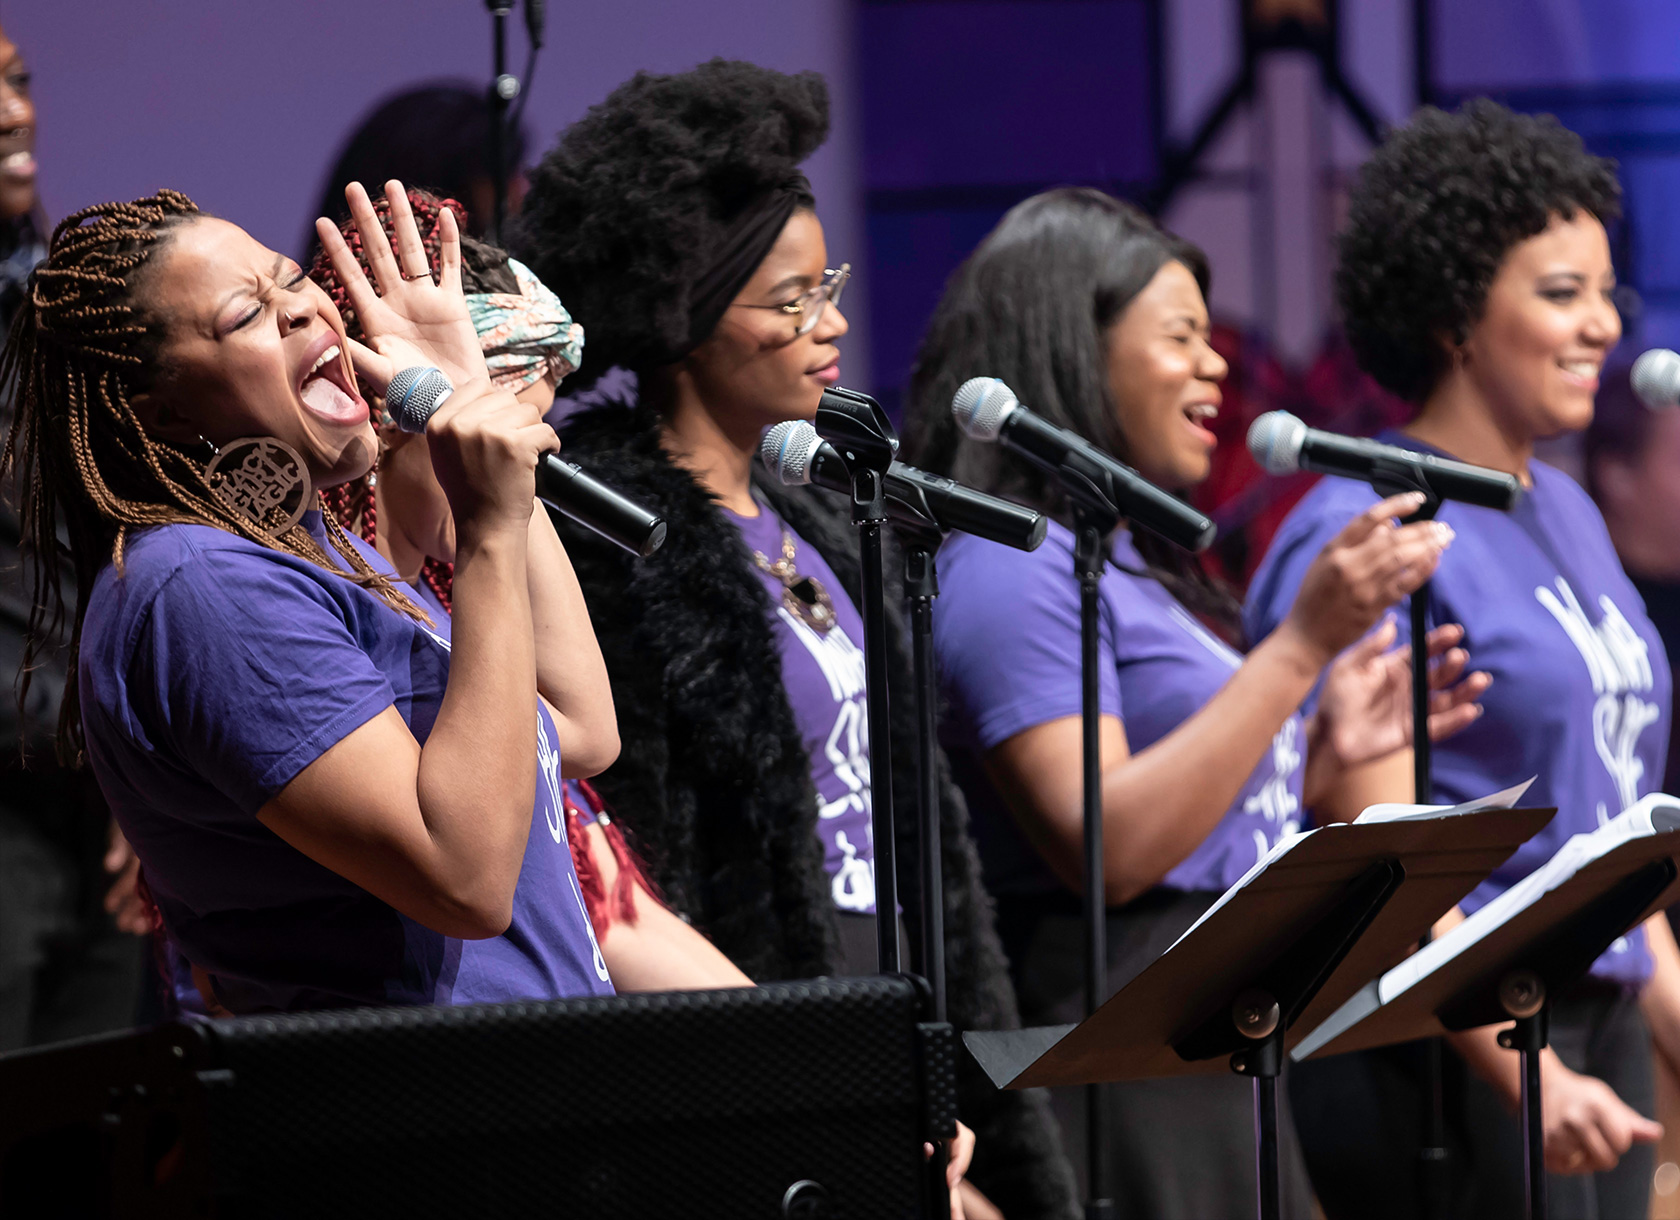 Four young black women wearing purple T-shirts and singing into microphones.